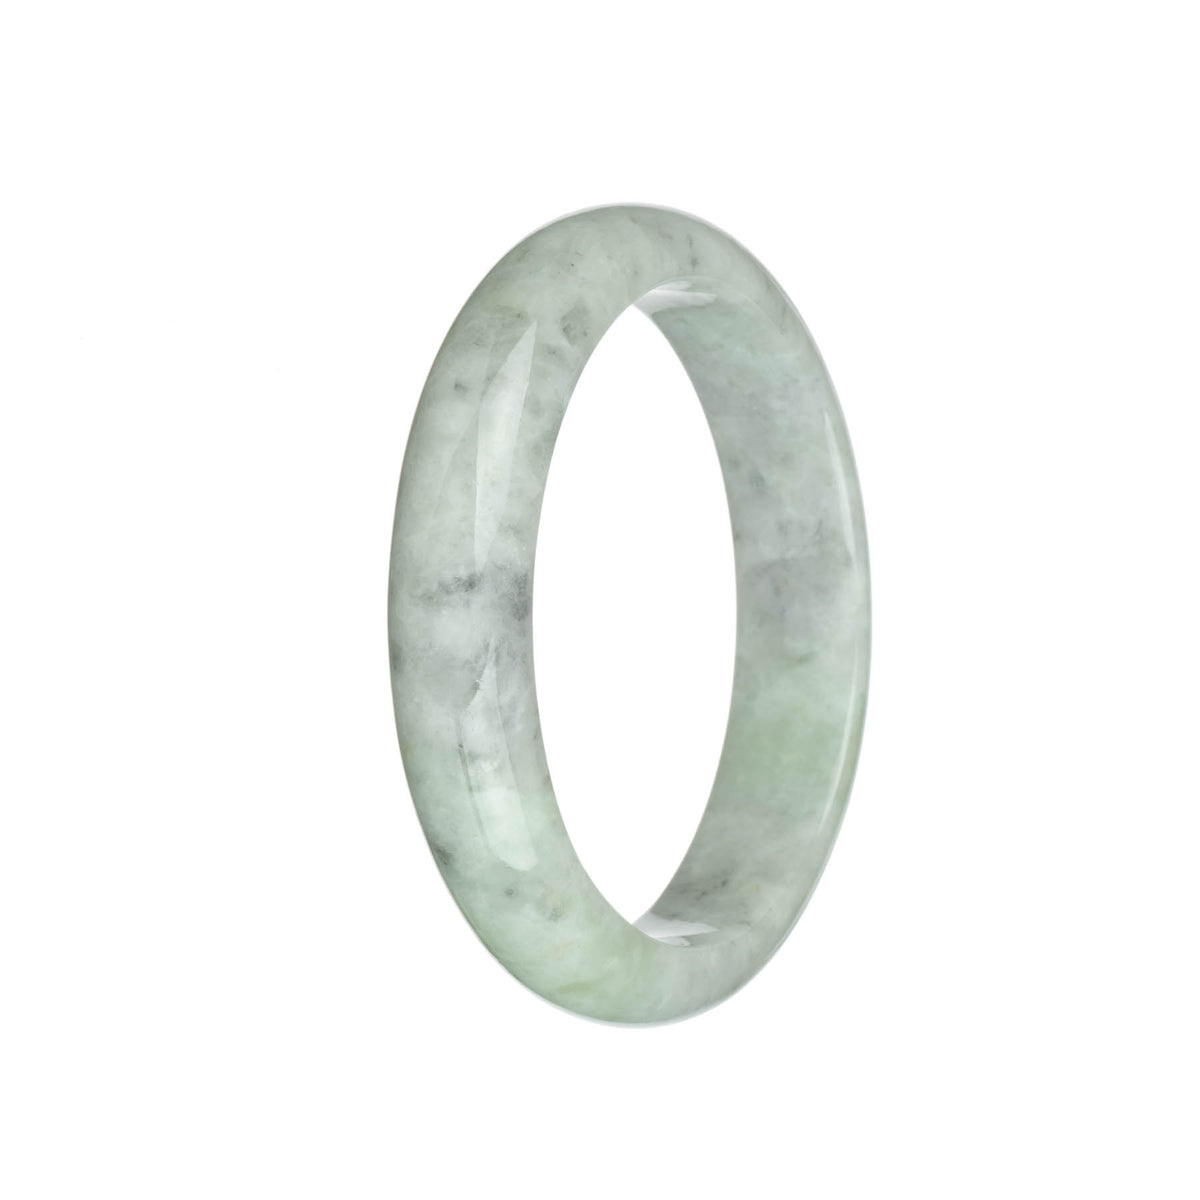 Genuine Type A Light Green and Light Grey with Green Patterns and Grey Spots Jadeite Jade Bangle - 63mm Half Moon